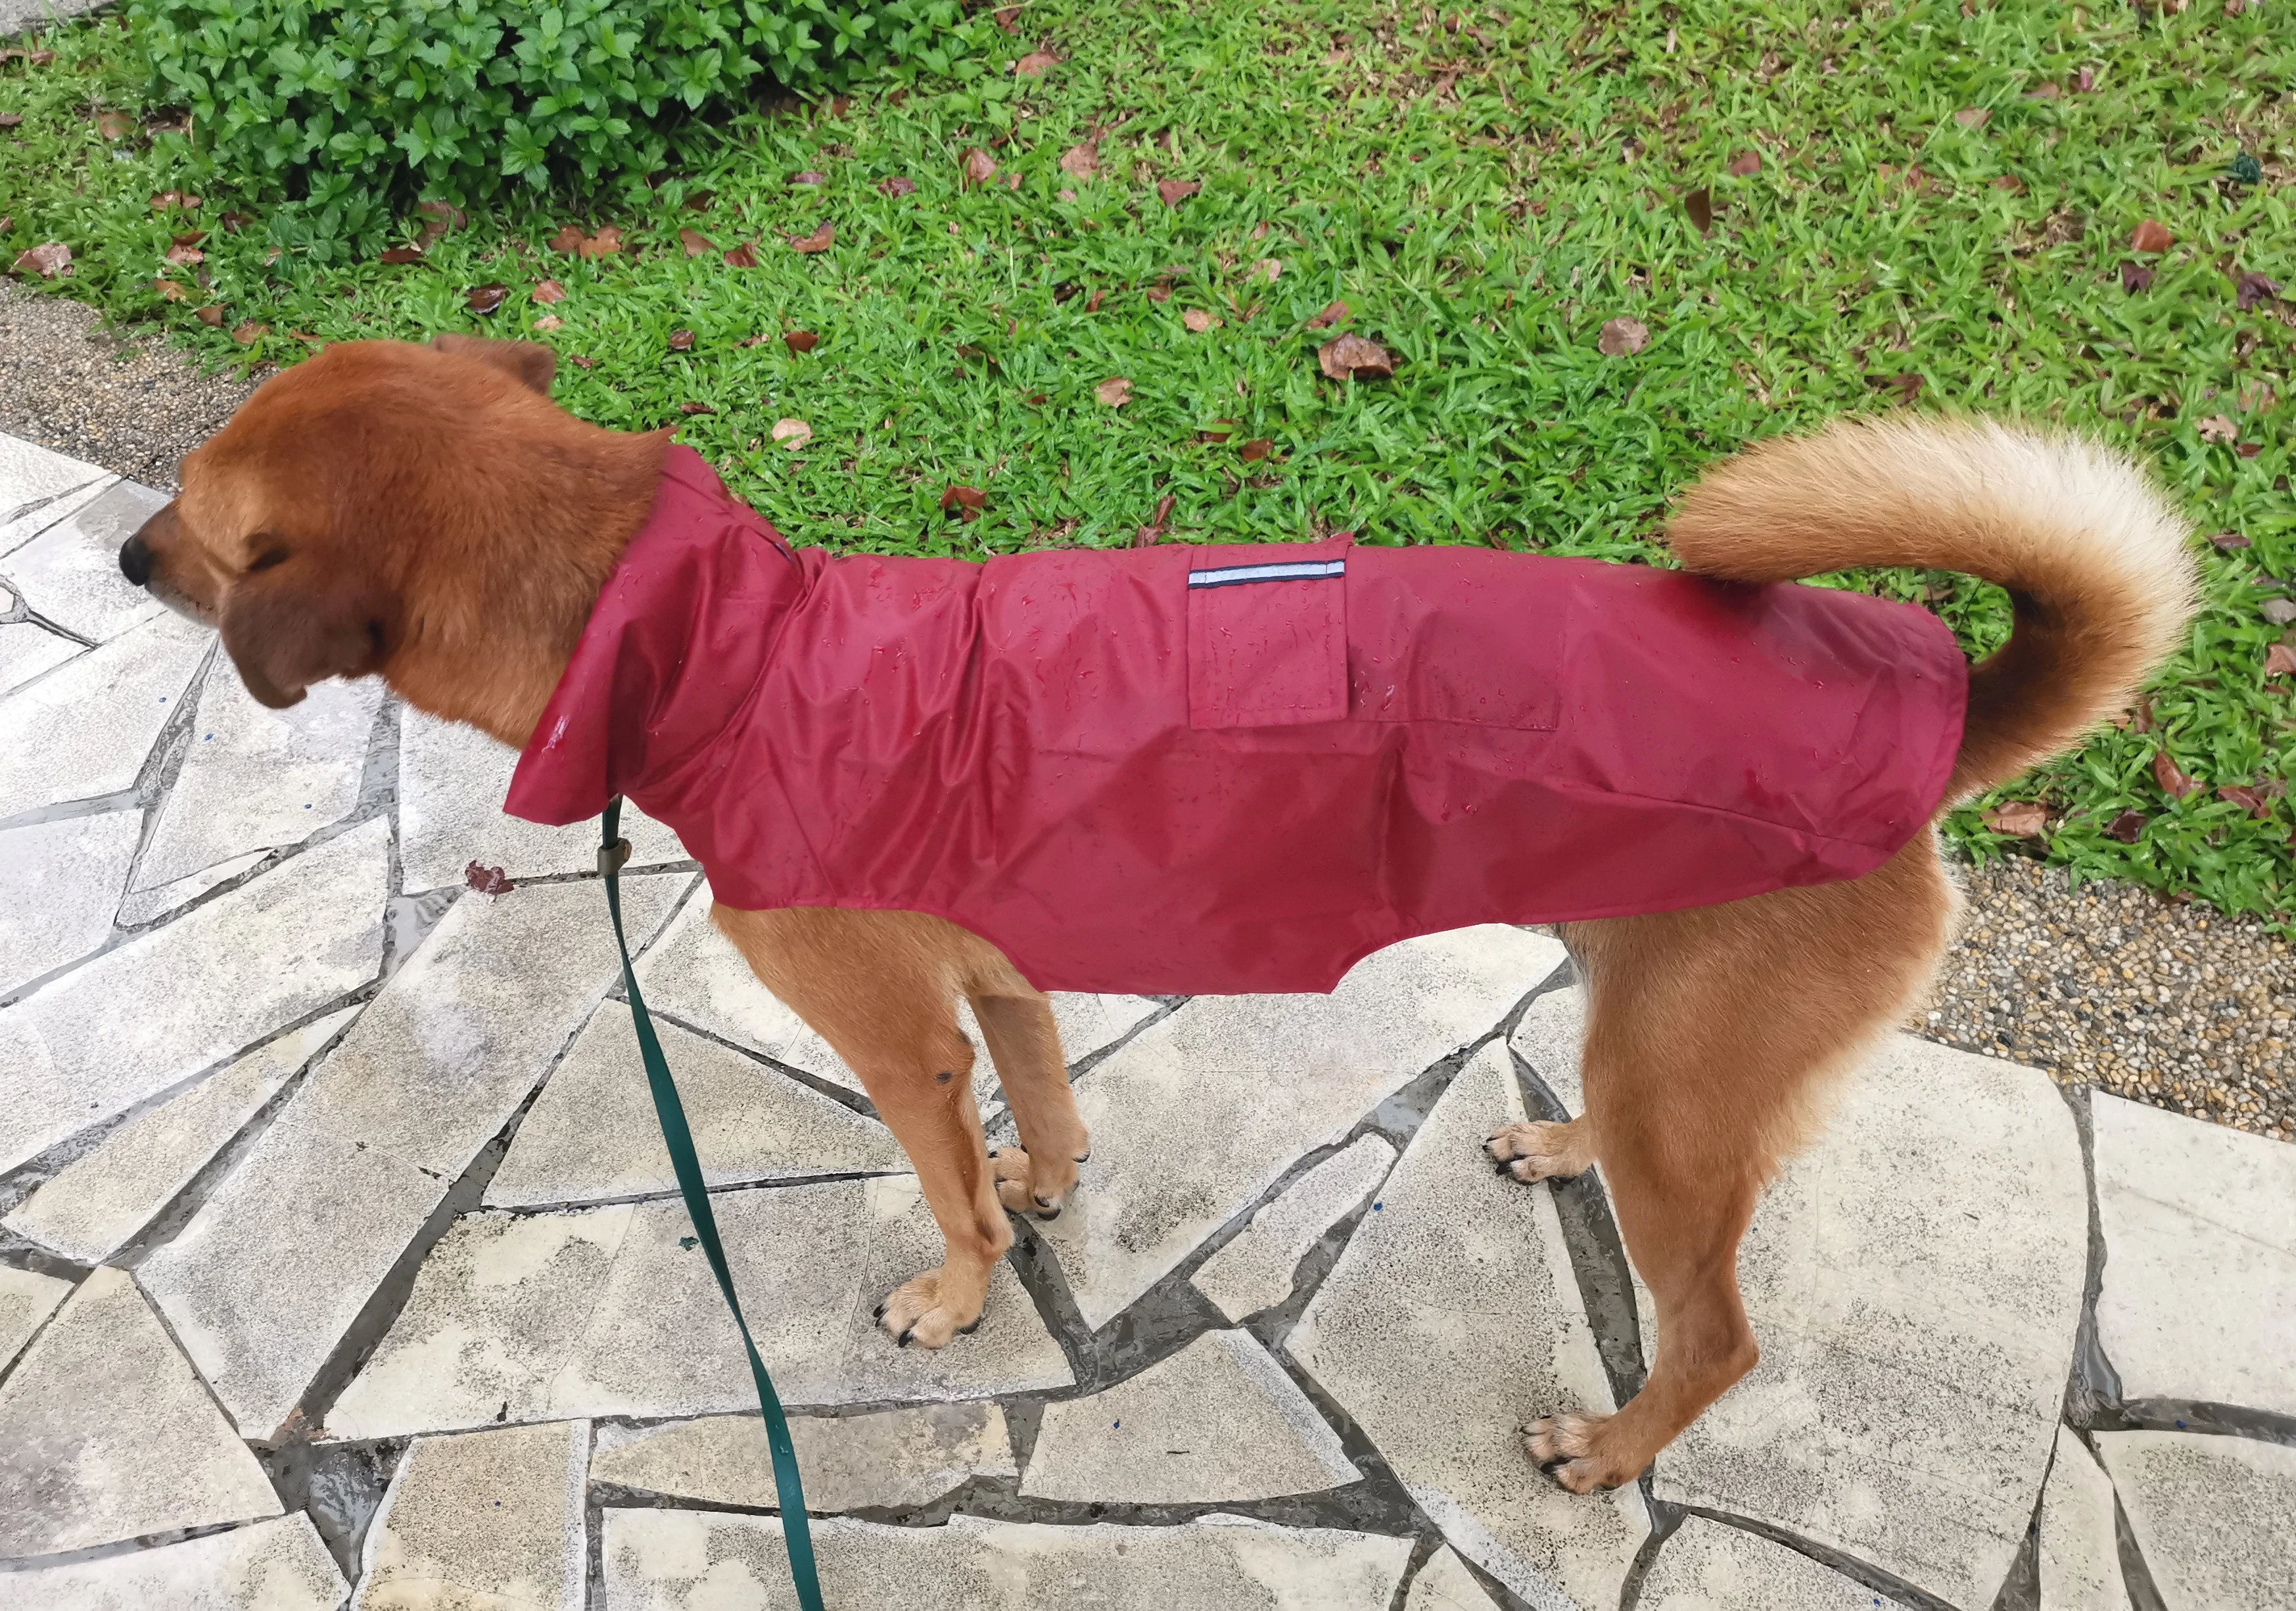 Convenient Raincoat To Keep Dogs Dry On Rainy Days photo review